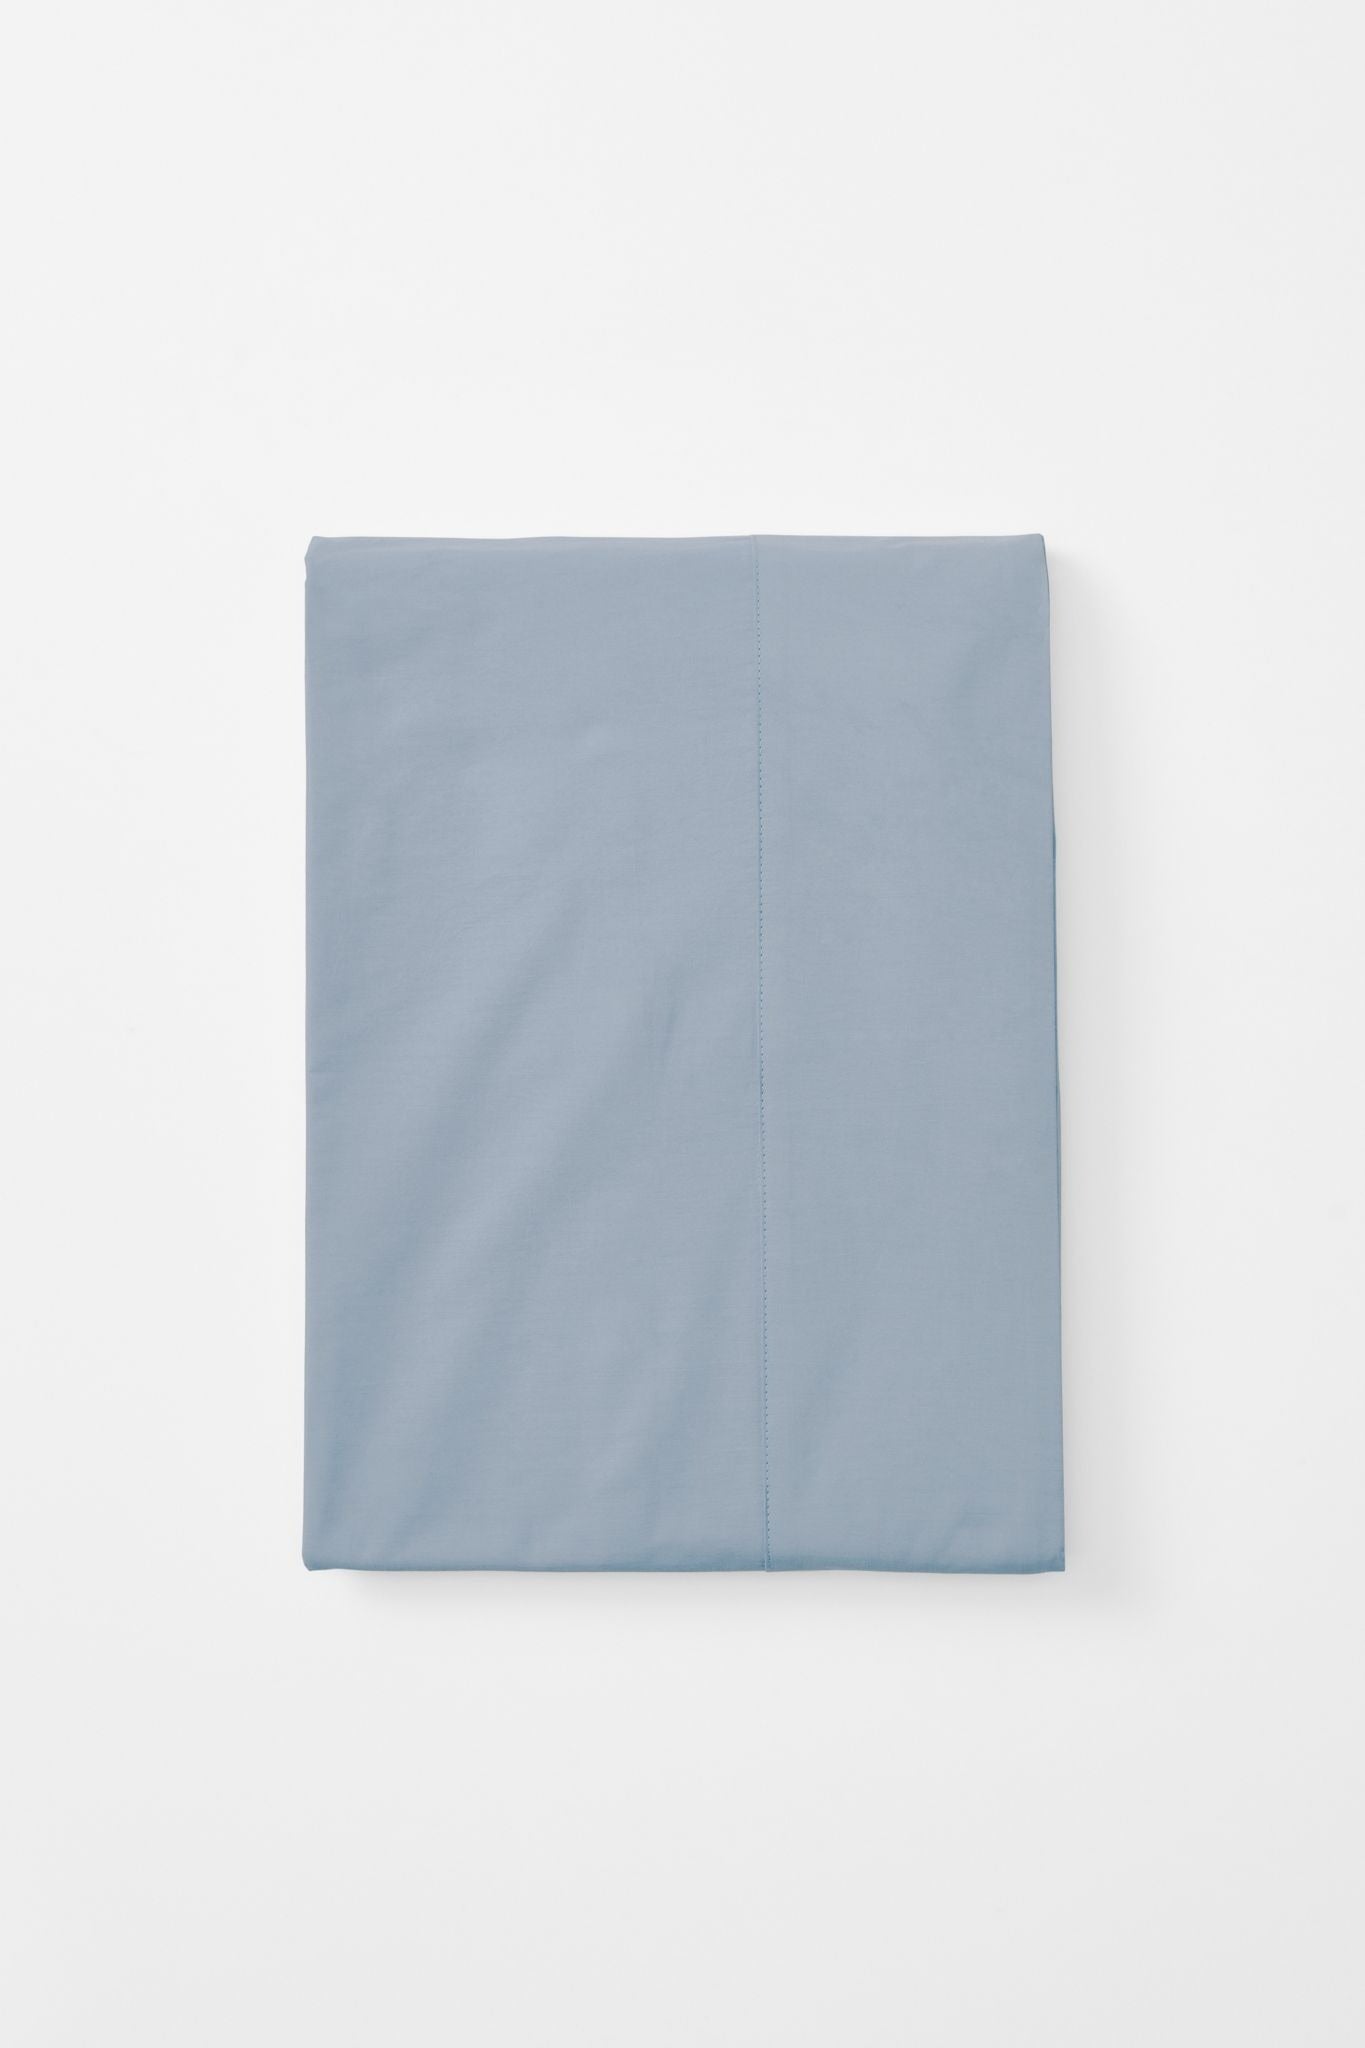 Mono Organic Cotton Percale Flat Sheet Bed Sheets in Half Blue